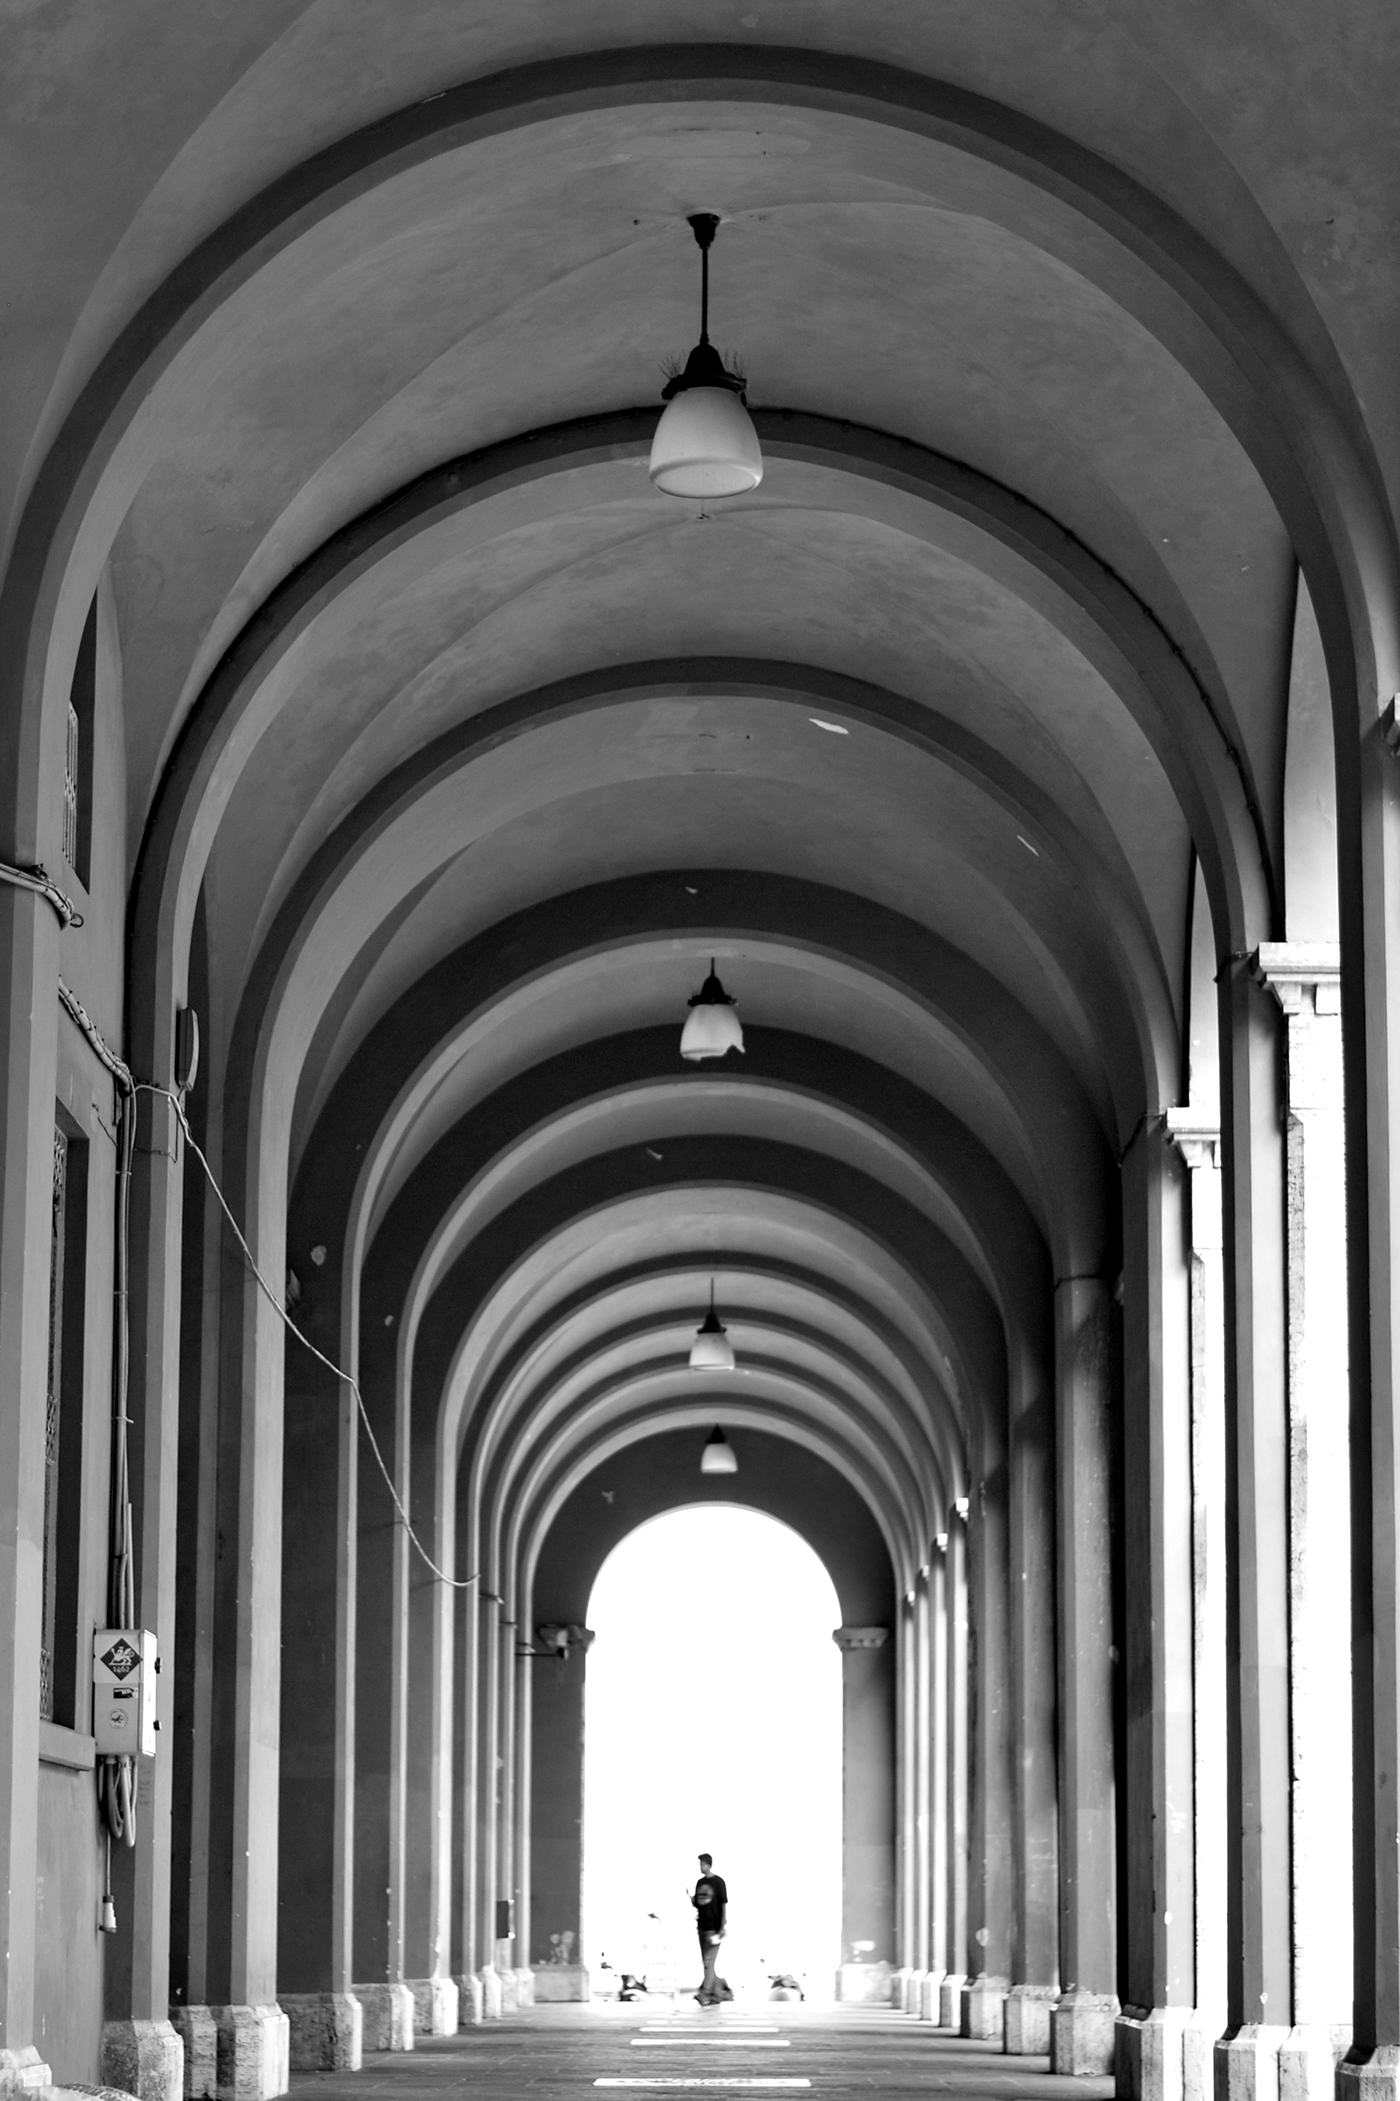 bw marc Tran Picture detail composition symmetry mirror Street